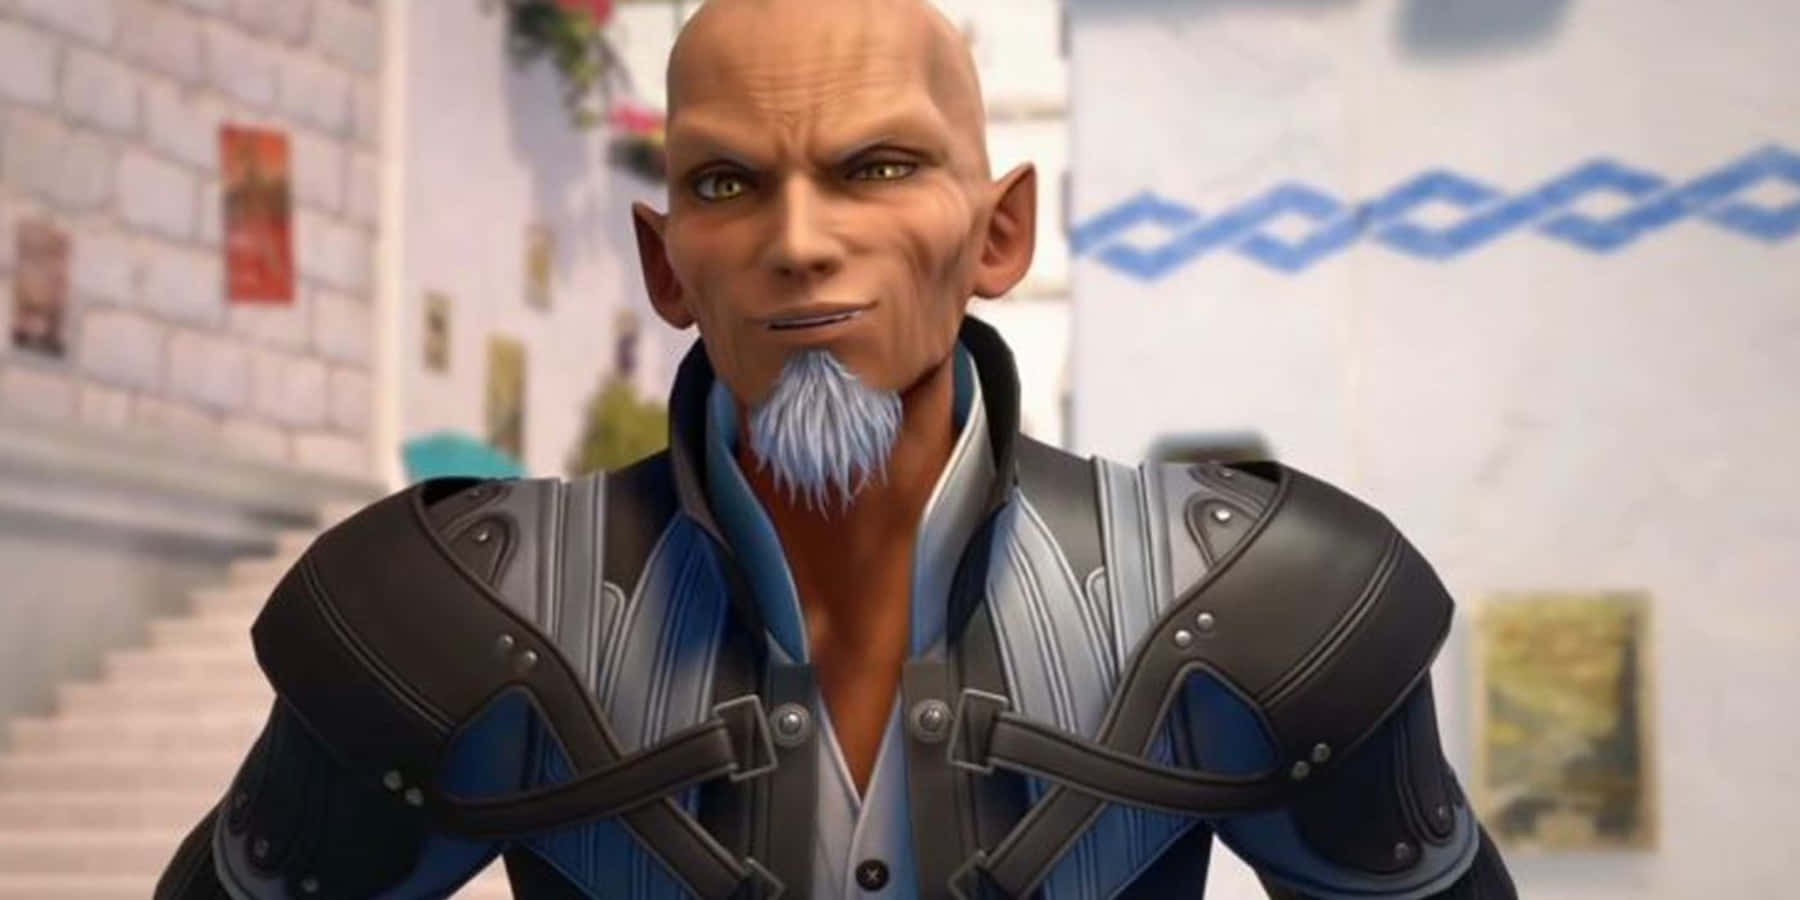 Master Xehanort, the significant antagonist in the Kingdom Hearts series Wallpaper